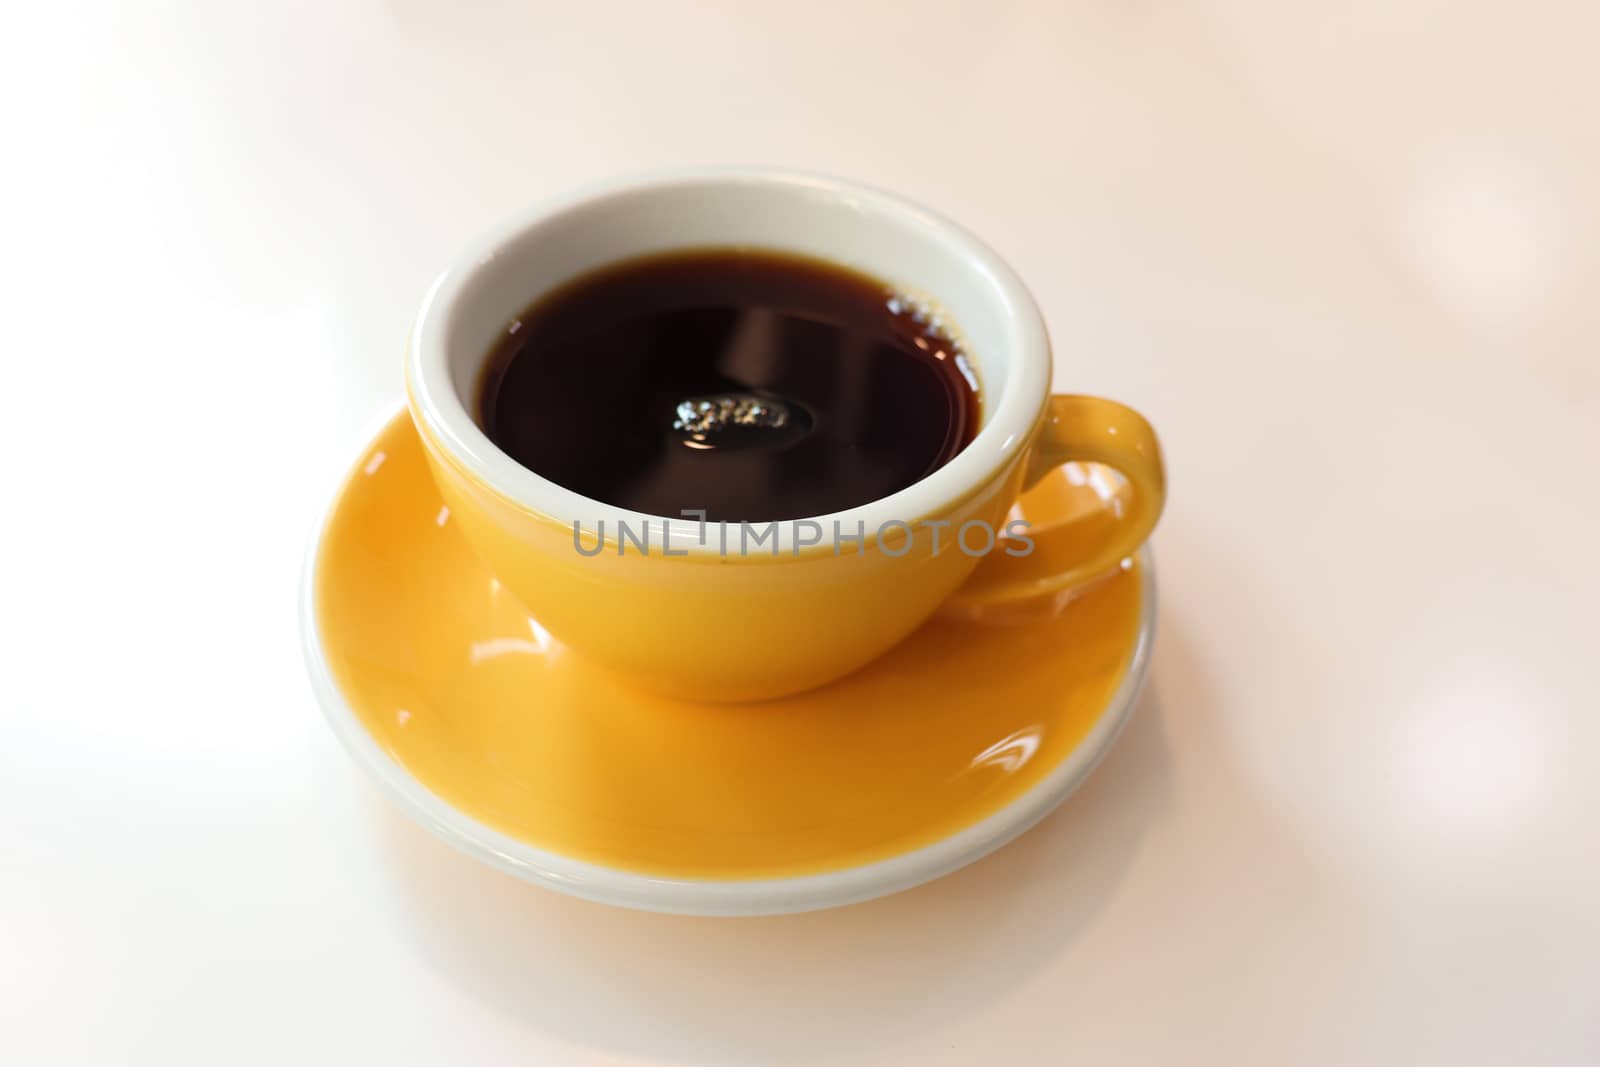 Cup of coffee with latte art on wooden background